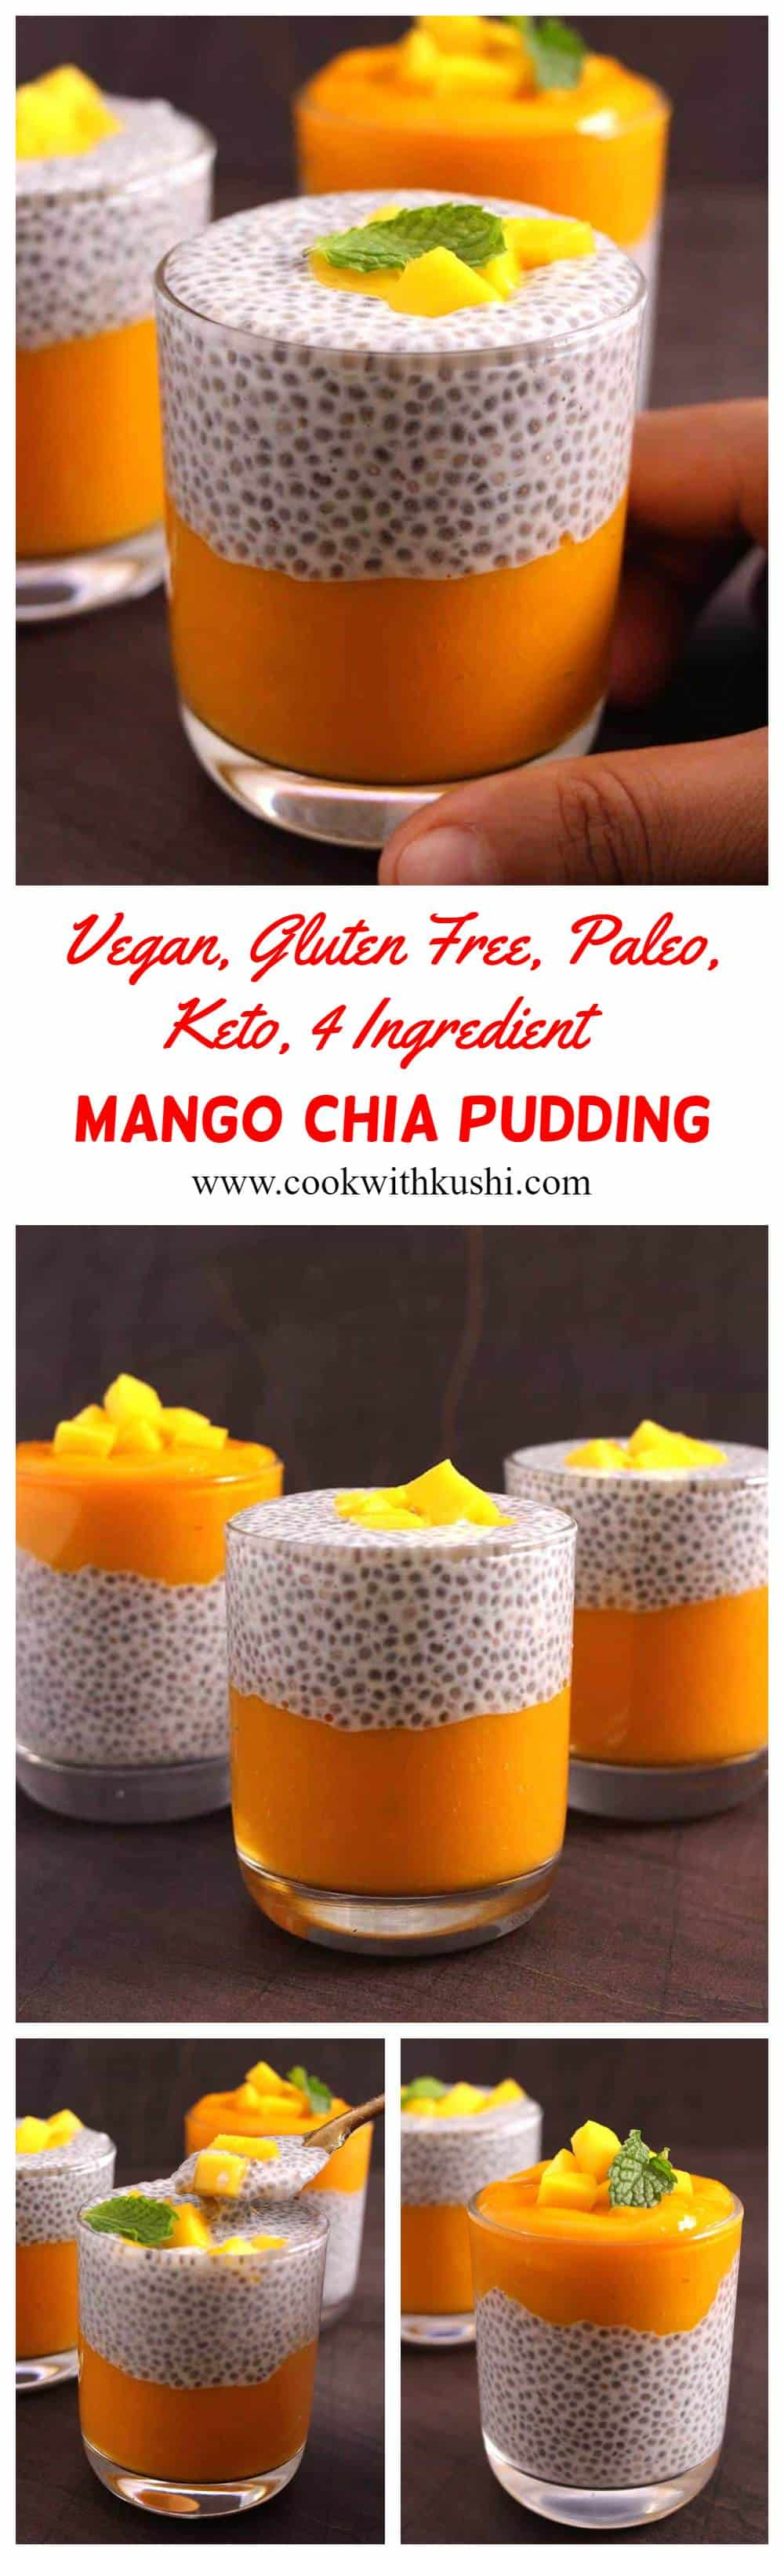 Mango Chia Pudding is a healthy and nutritious, creamy & delicious make ahead option for  breakfast, midday snack or even as a dessert recipe prepared using just 4 ingredients. #mangoes #chiaseeds #chiapudding #oevrnightpudding #makeahead breakfast #Middaysnack #dessert #highfiber #noccok #proetein #plantbased #pudding #weightloss #whole30 #vegan #glutenfree #paleo #keto 